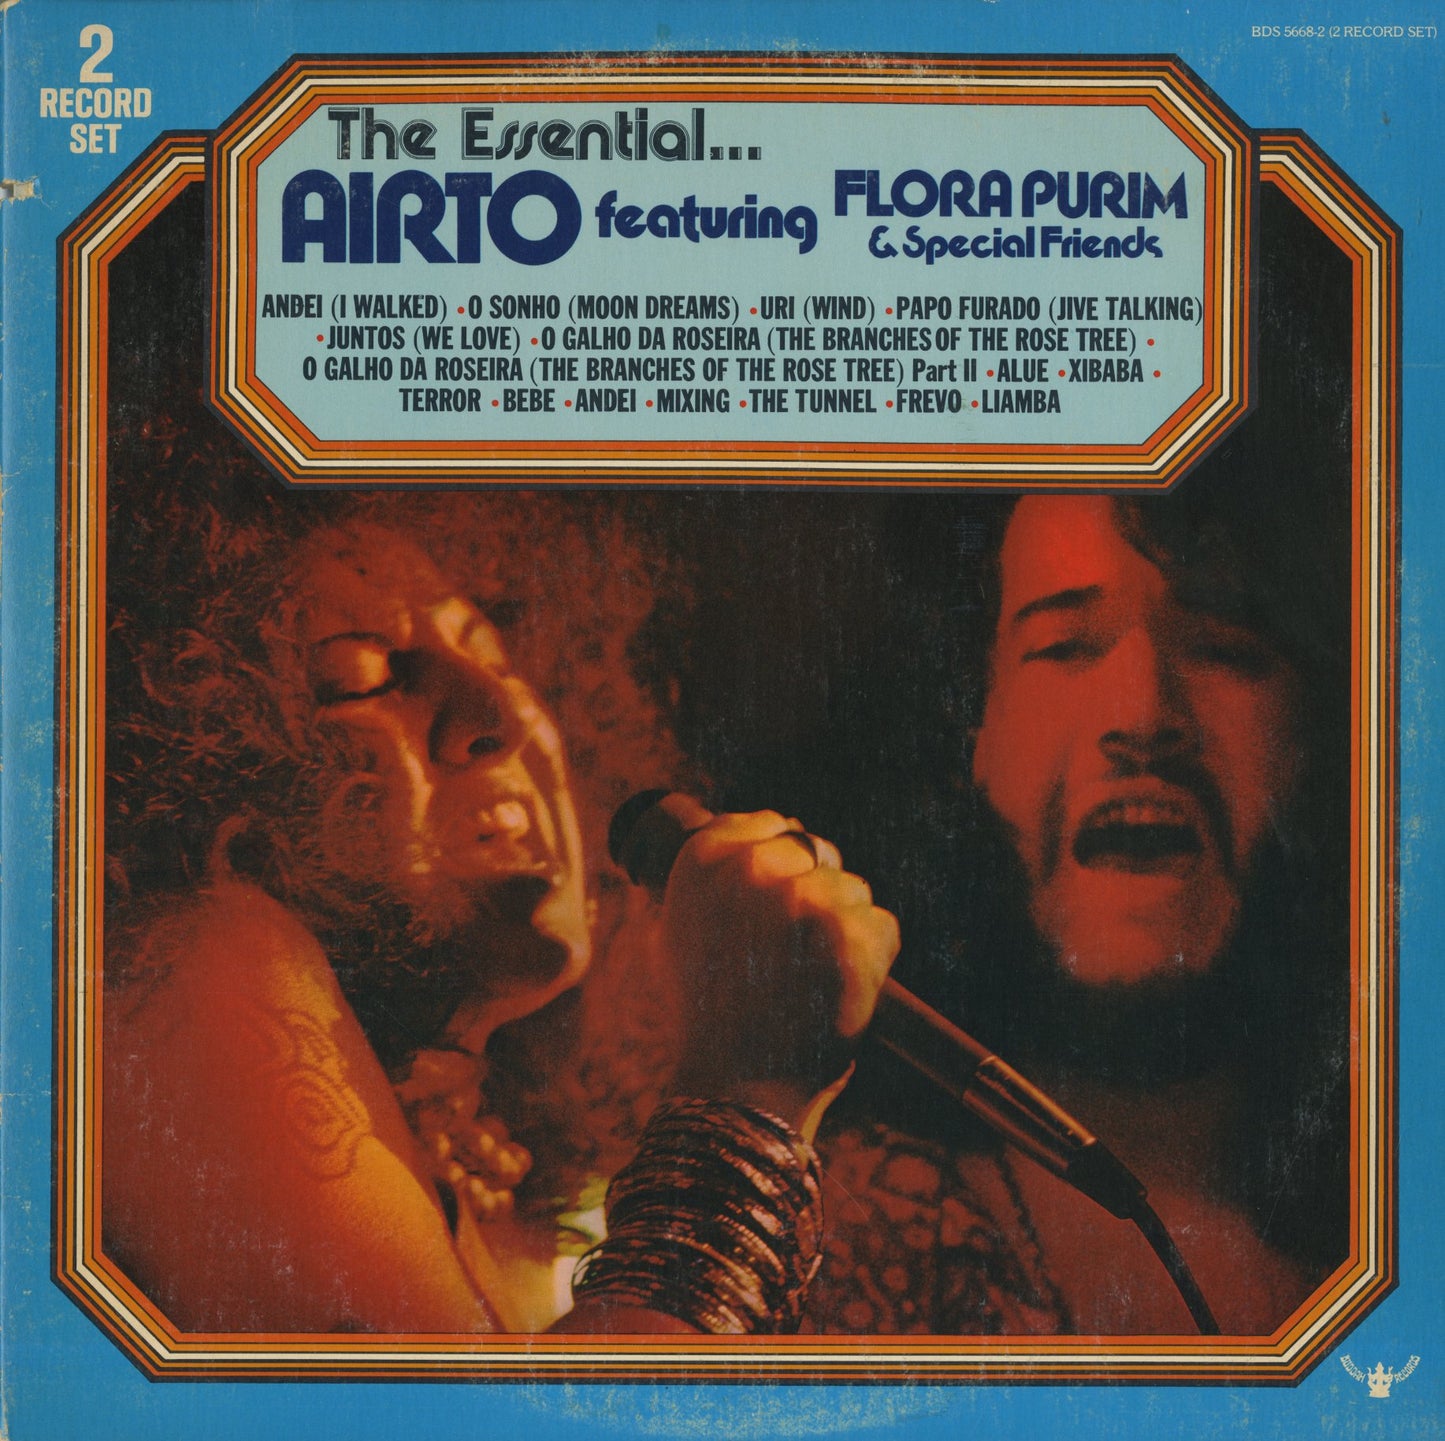 Airto / アイアート / The Essential -2LP (BDS 5668-2)